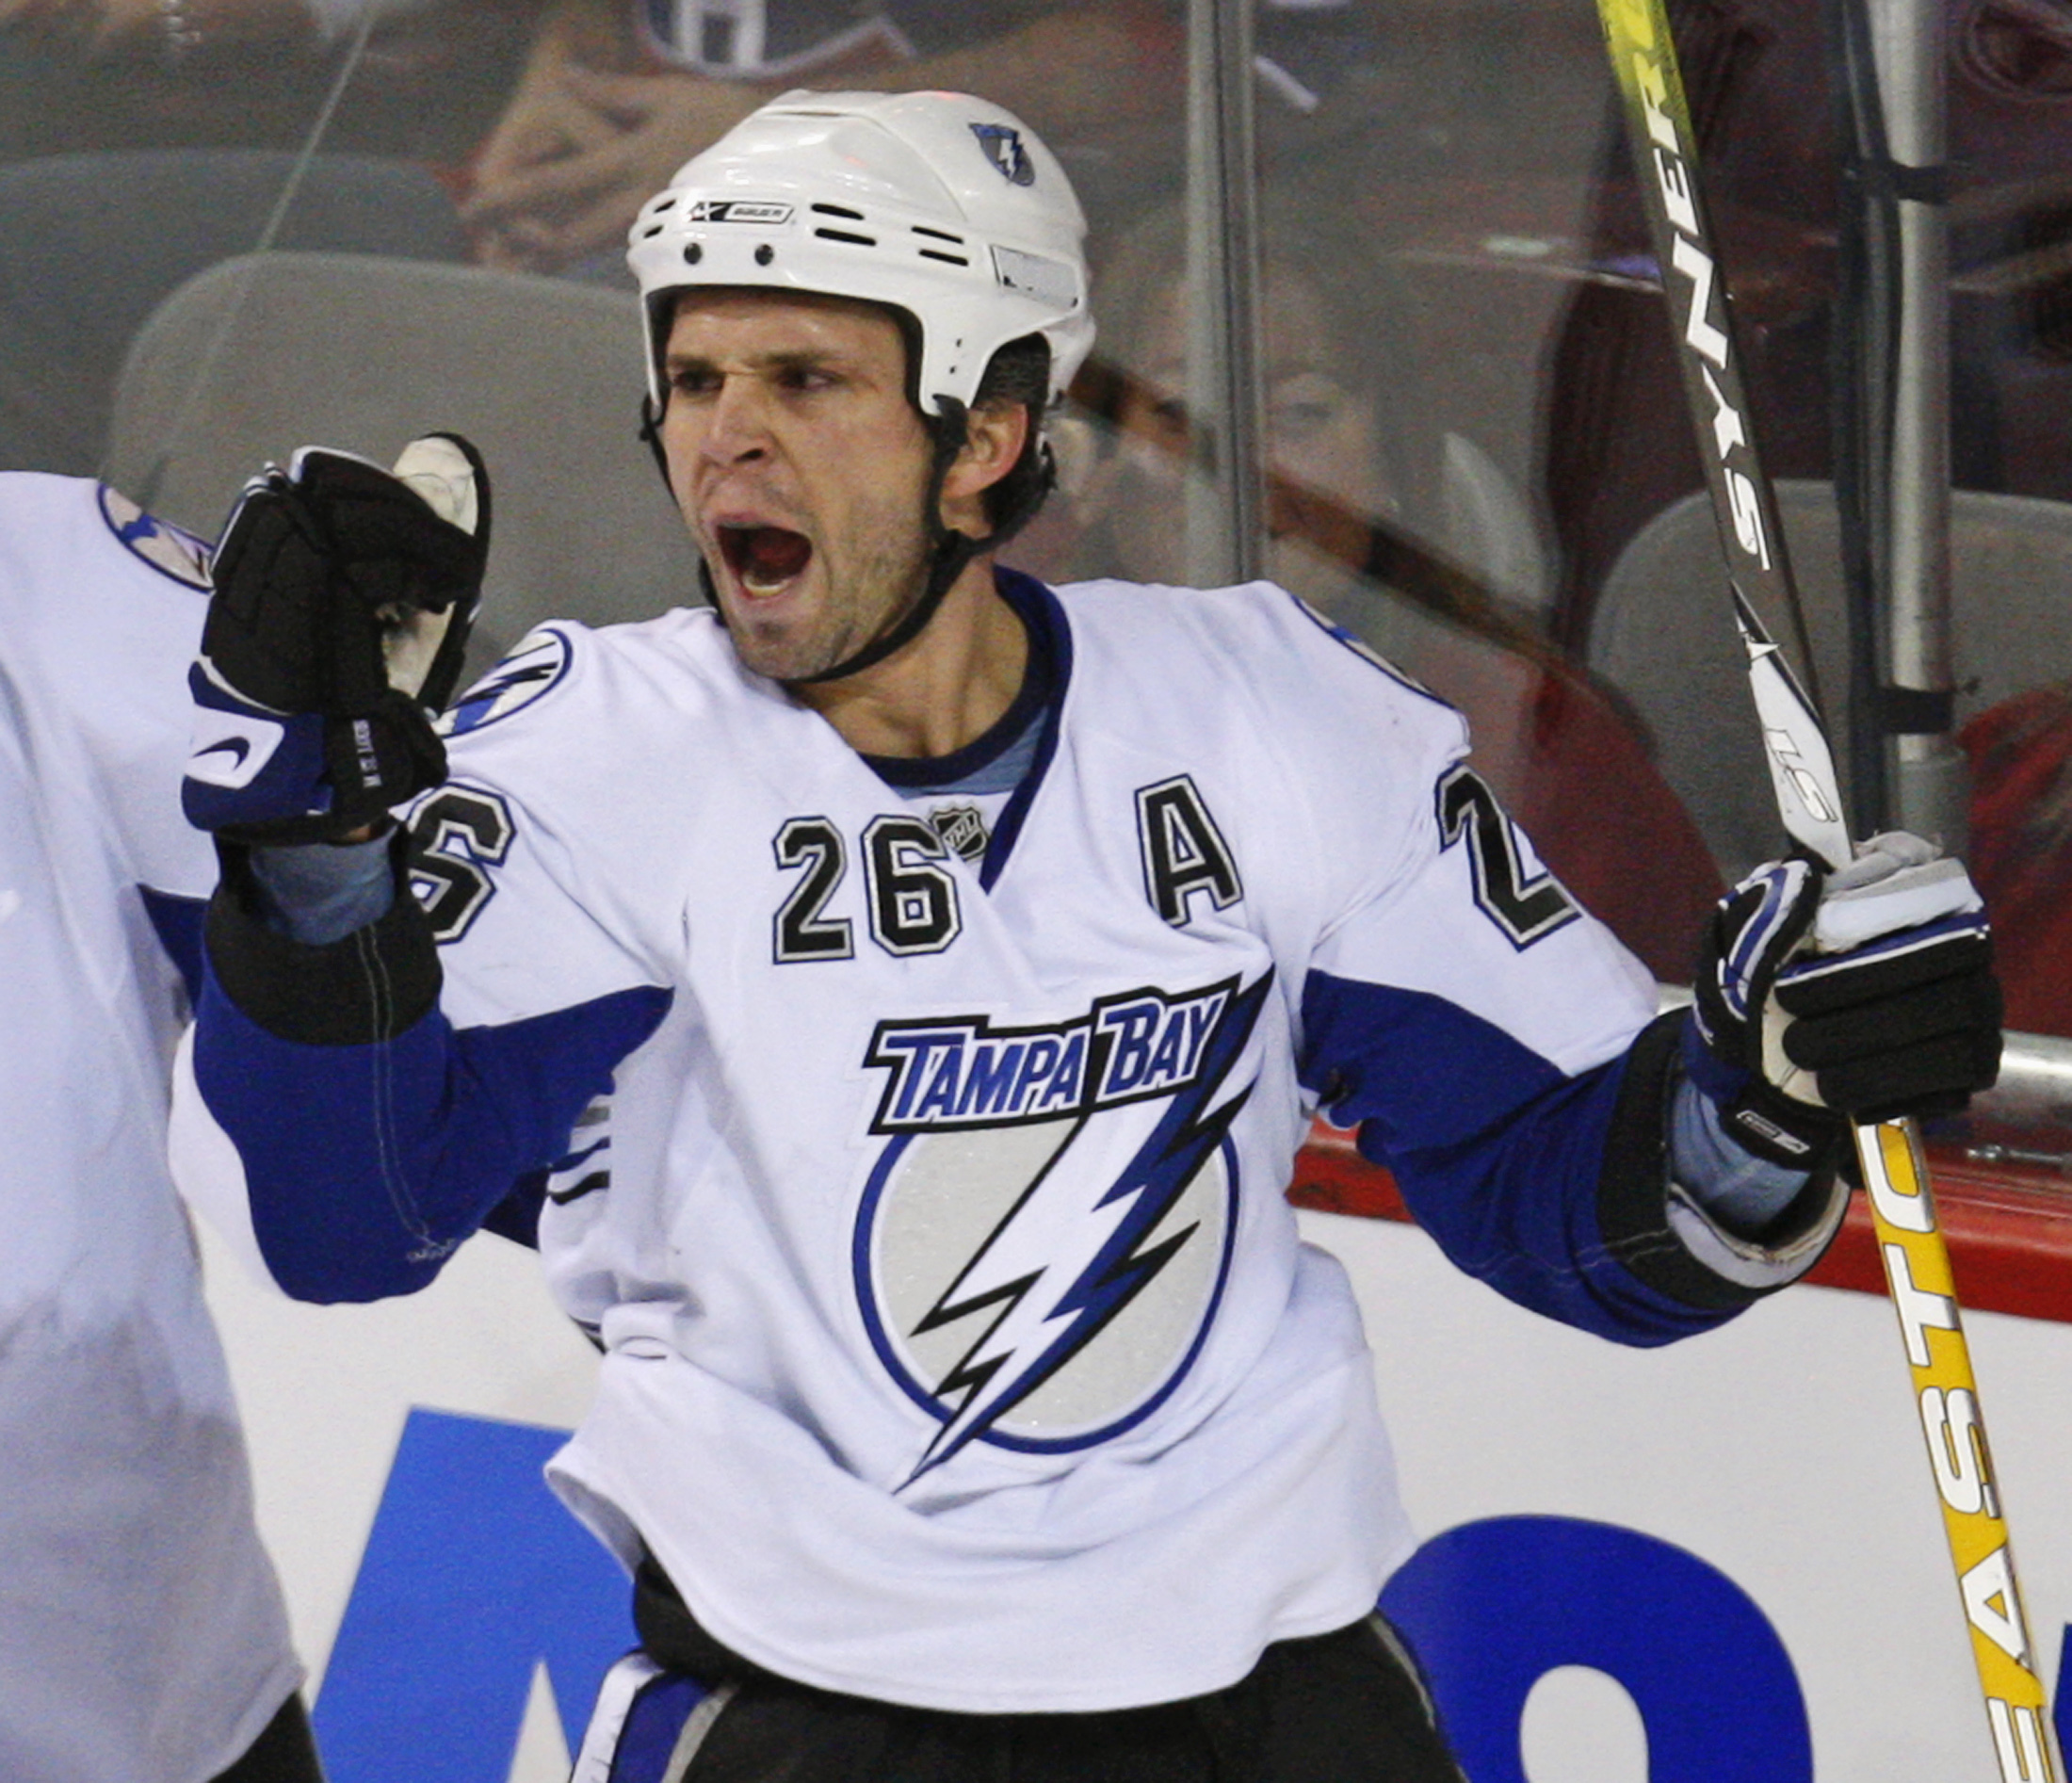 Martin St. Louis on ice wallpapers and images - wallpapers, pictures ...